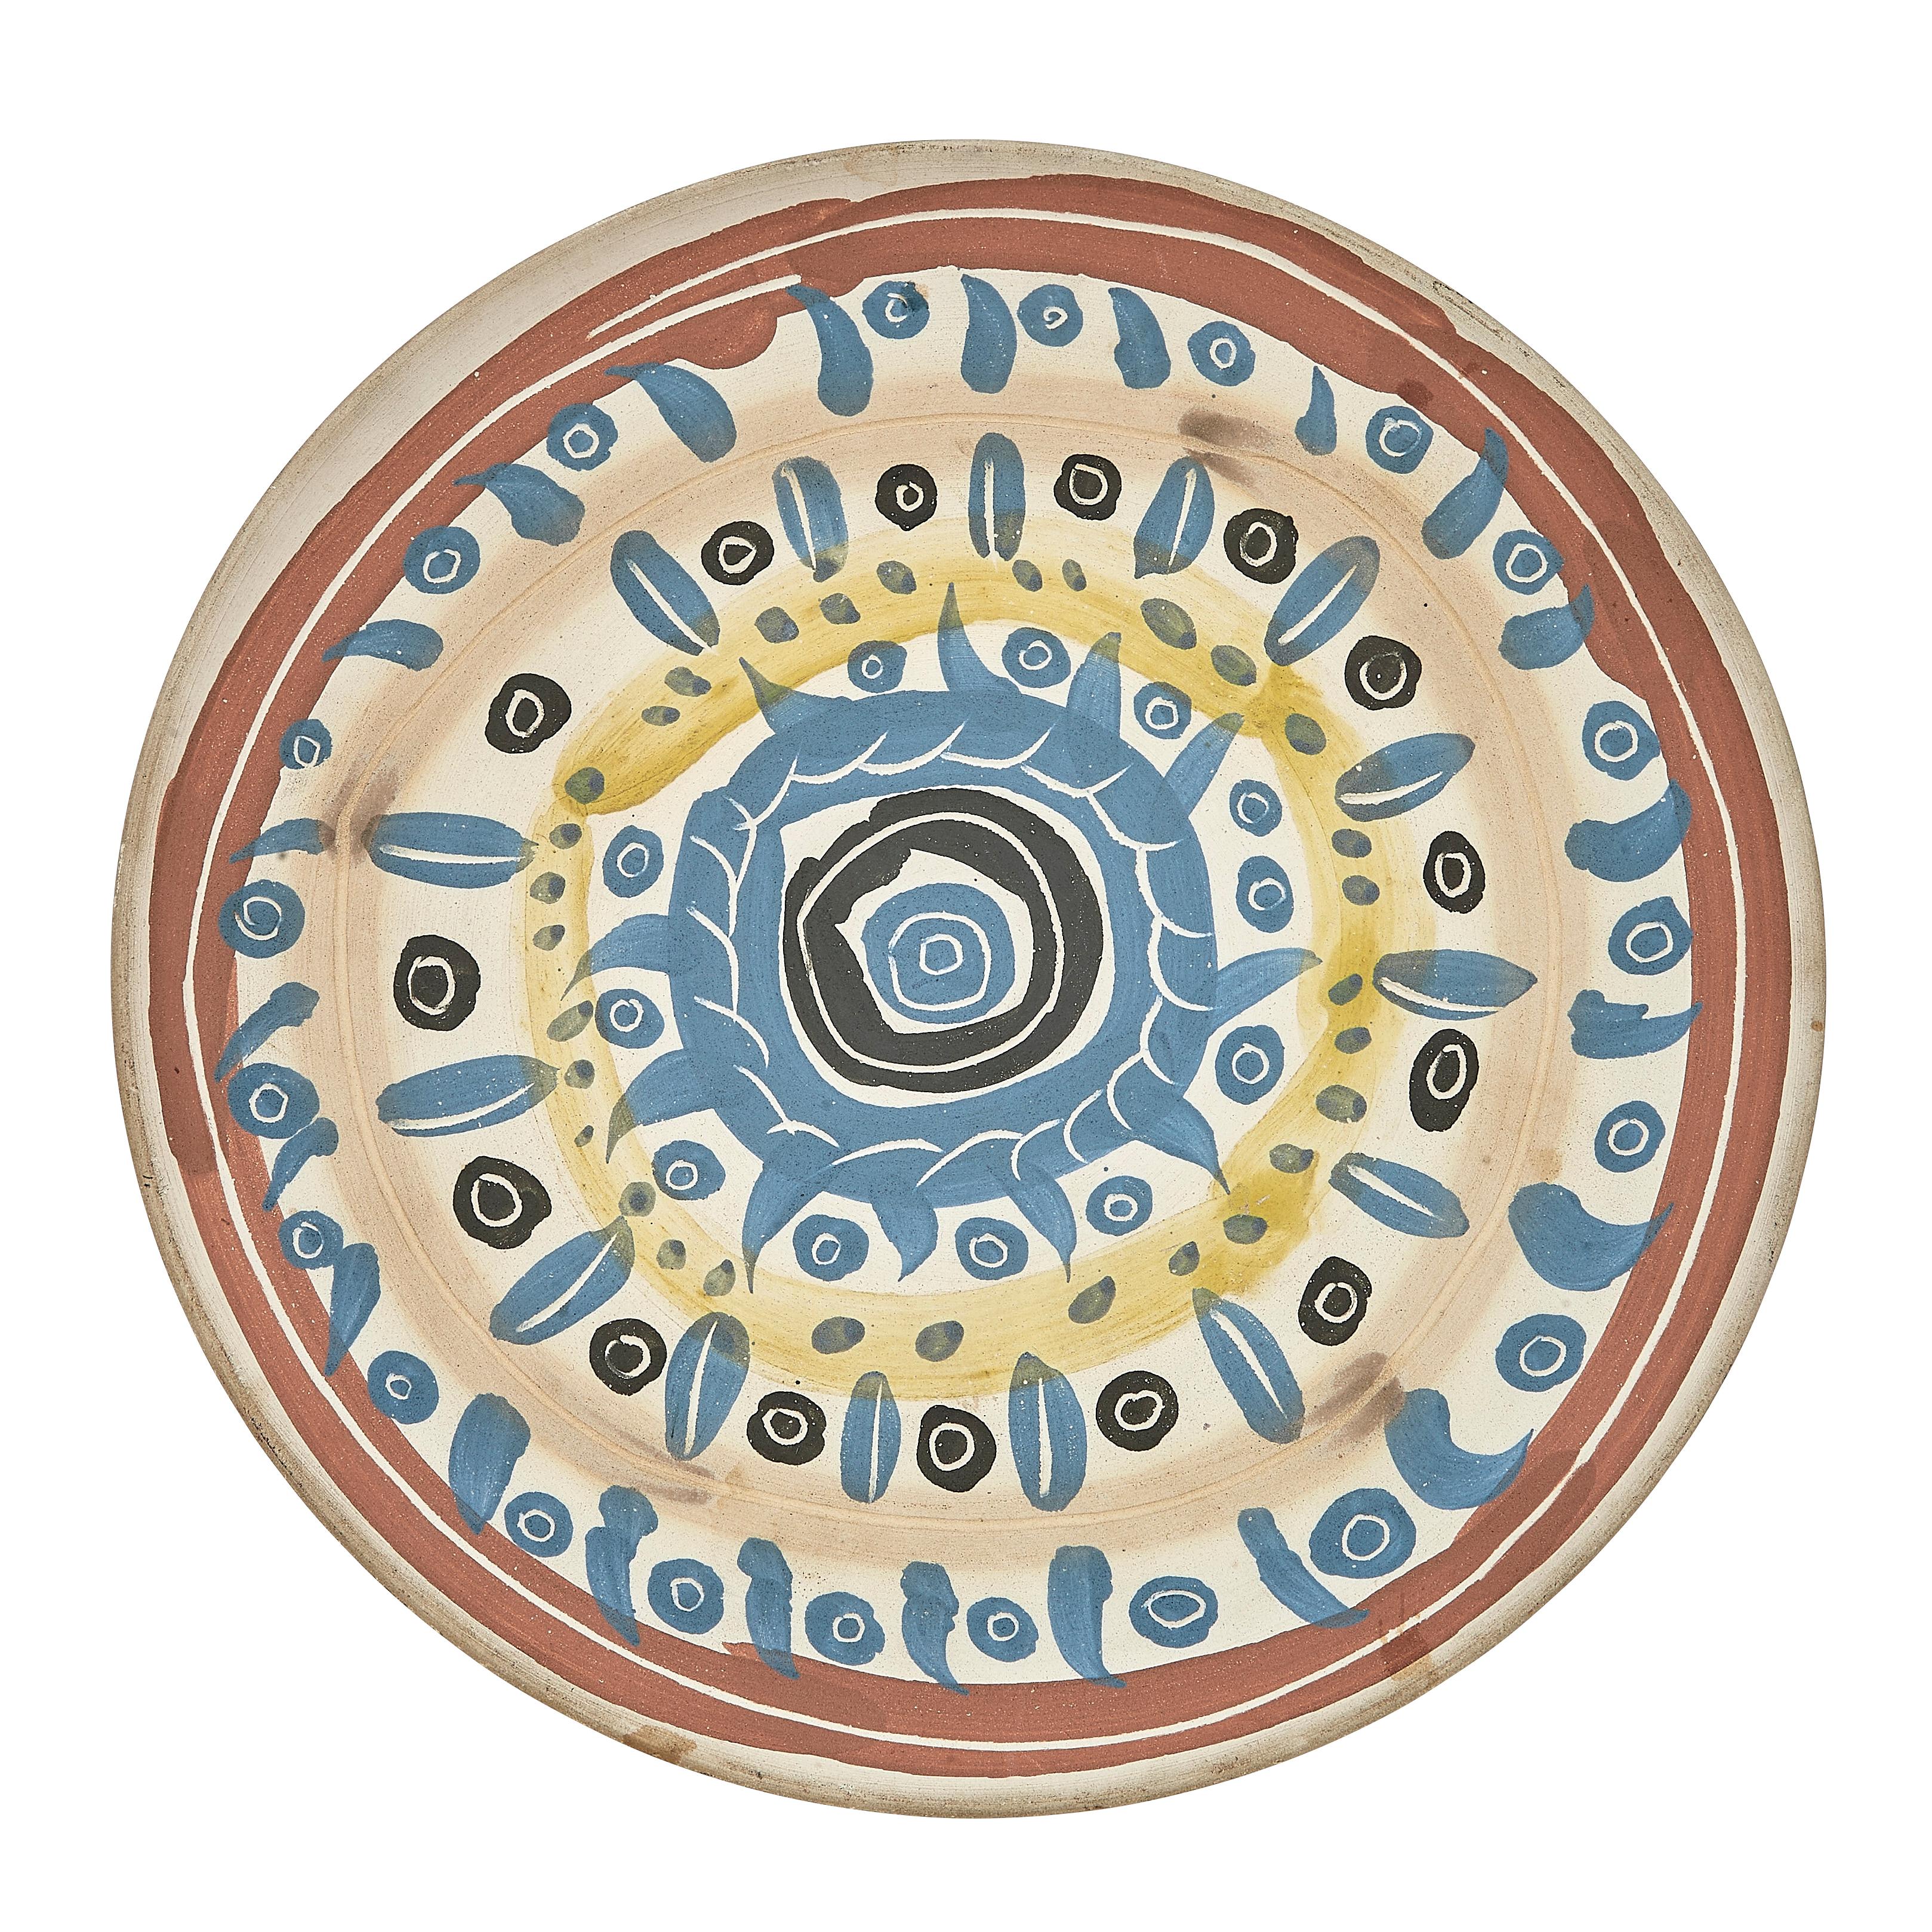 PABLO PICASSO (1881-1973) 
Motif spiralé (A. R. 404)

Terre de faïence plate, 1957, numbered 71/500, with the workshop numbering, incised 'Edition Picasso' and 'Madoura', partially painted, with the Edition Picasso and Madoura stamps.